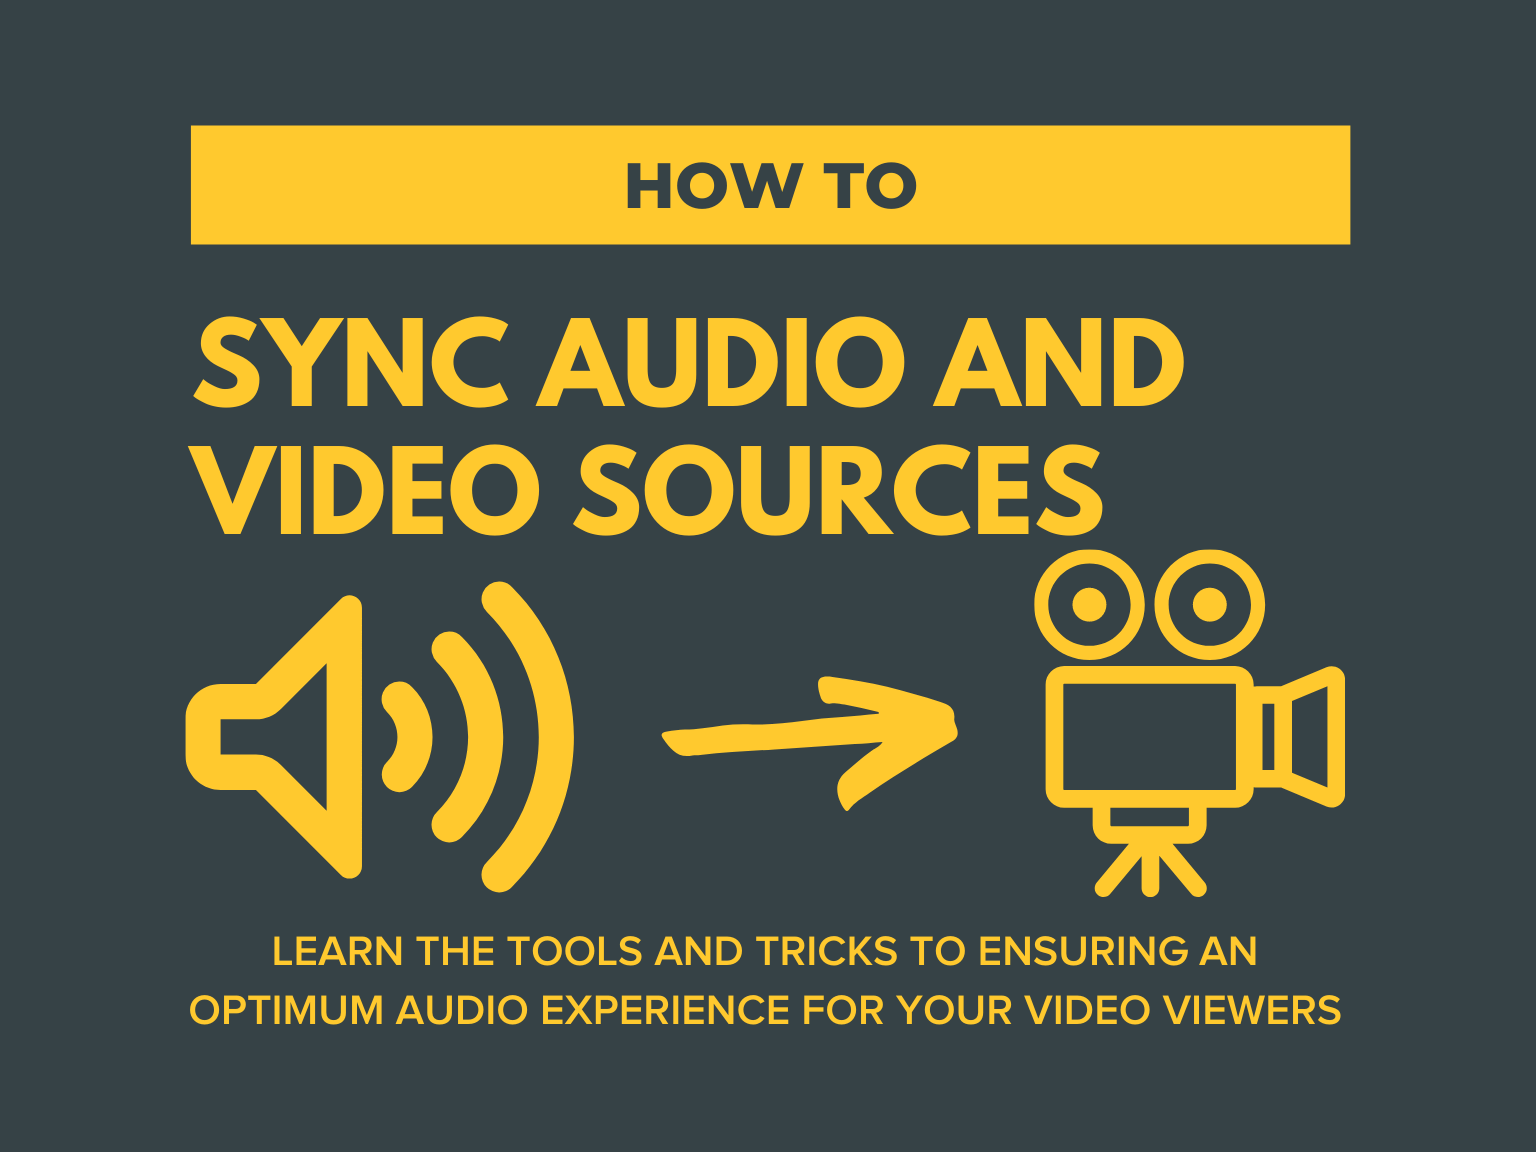 Use the player's sync adjustment settings to manually align the audio and video.
Continue playing the video to check if the sync remains accurate.